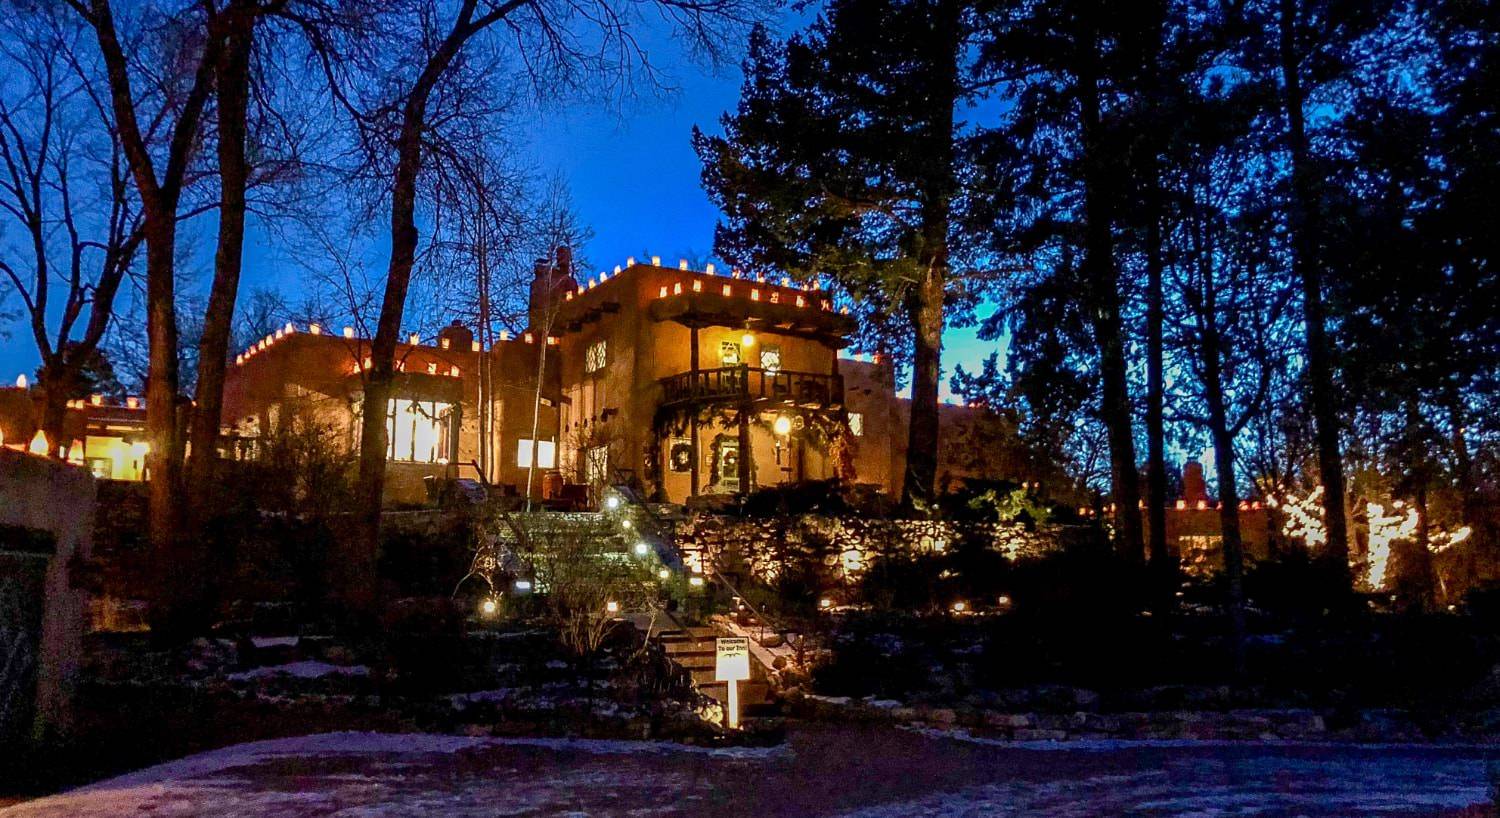 Exterior view of the property at dusk decorated for Christmas with lighted lanterns and evergreen draped on the patio